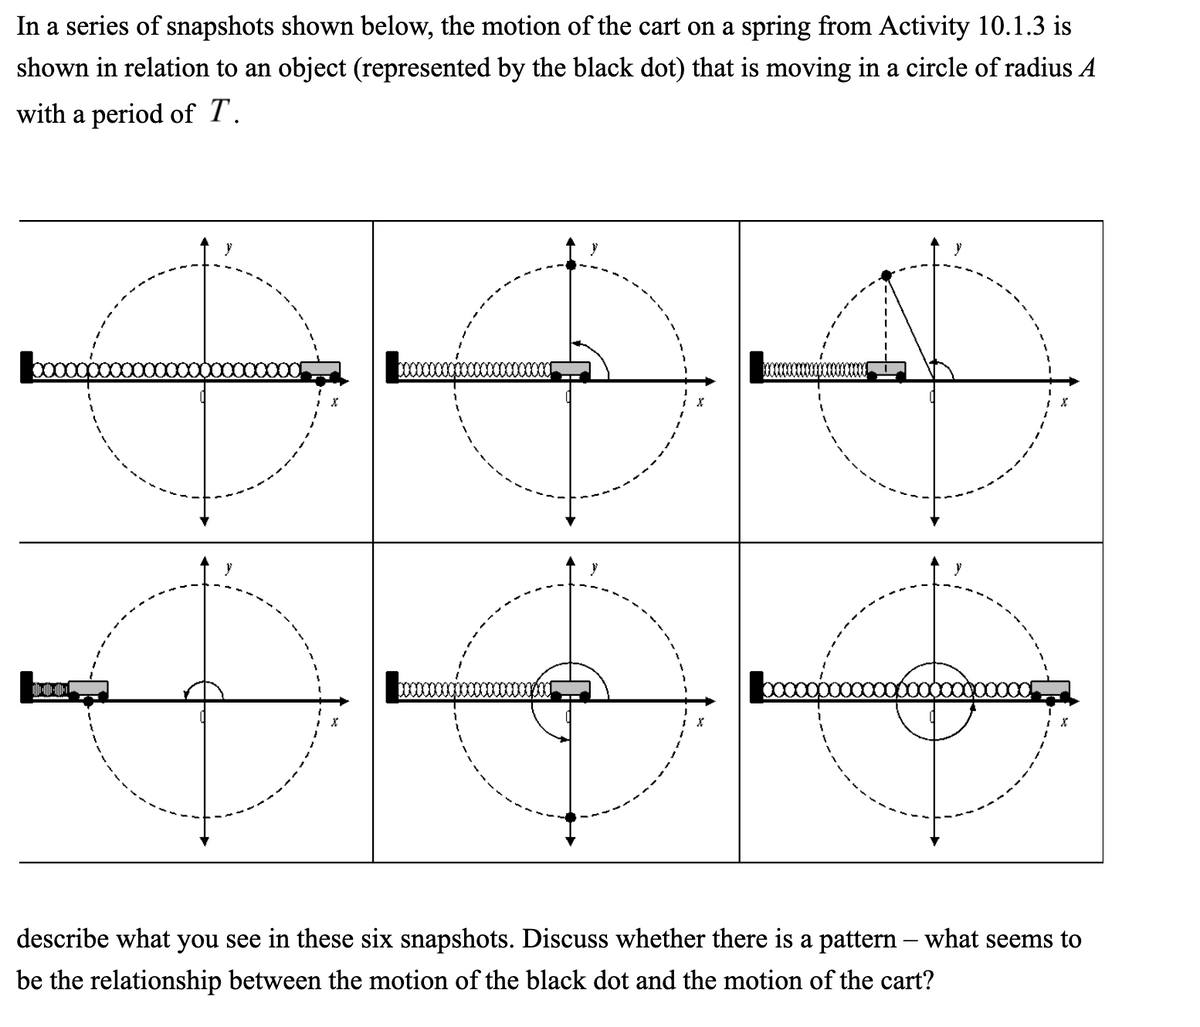 In a series of snapshots shown below, the motion of the cart on a spring from Activity 10.1.3 is
shown in relation to an object (represented by the black dot) that is moving in a circle of radius A
with a period of T.
CO000000
describe what you see in these six snapshots. Discuss whether there is a pattern – what seems to
be the relationship between the motion of the black dot and the motion of the cart?
